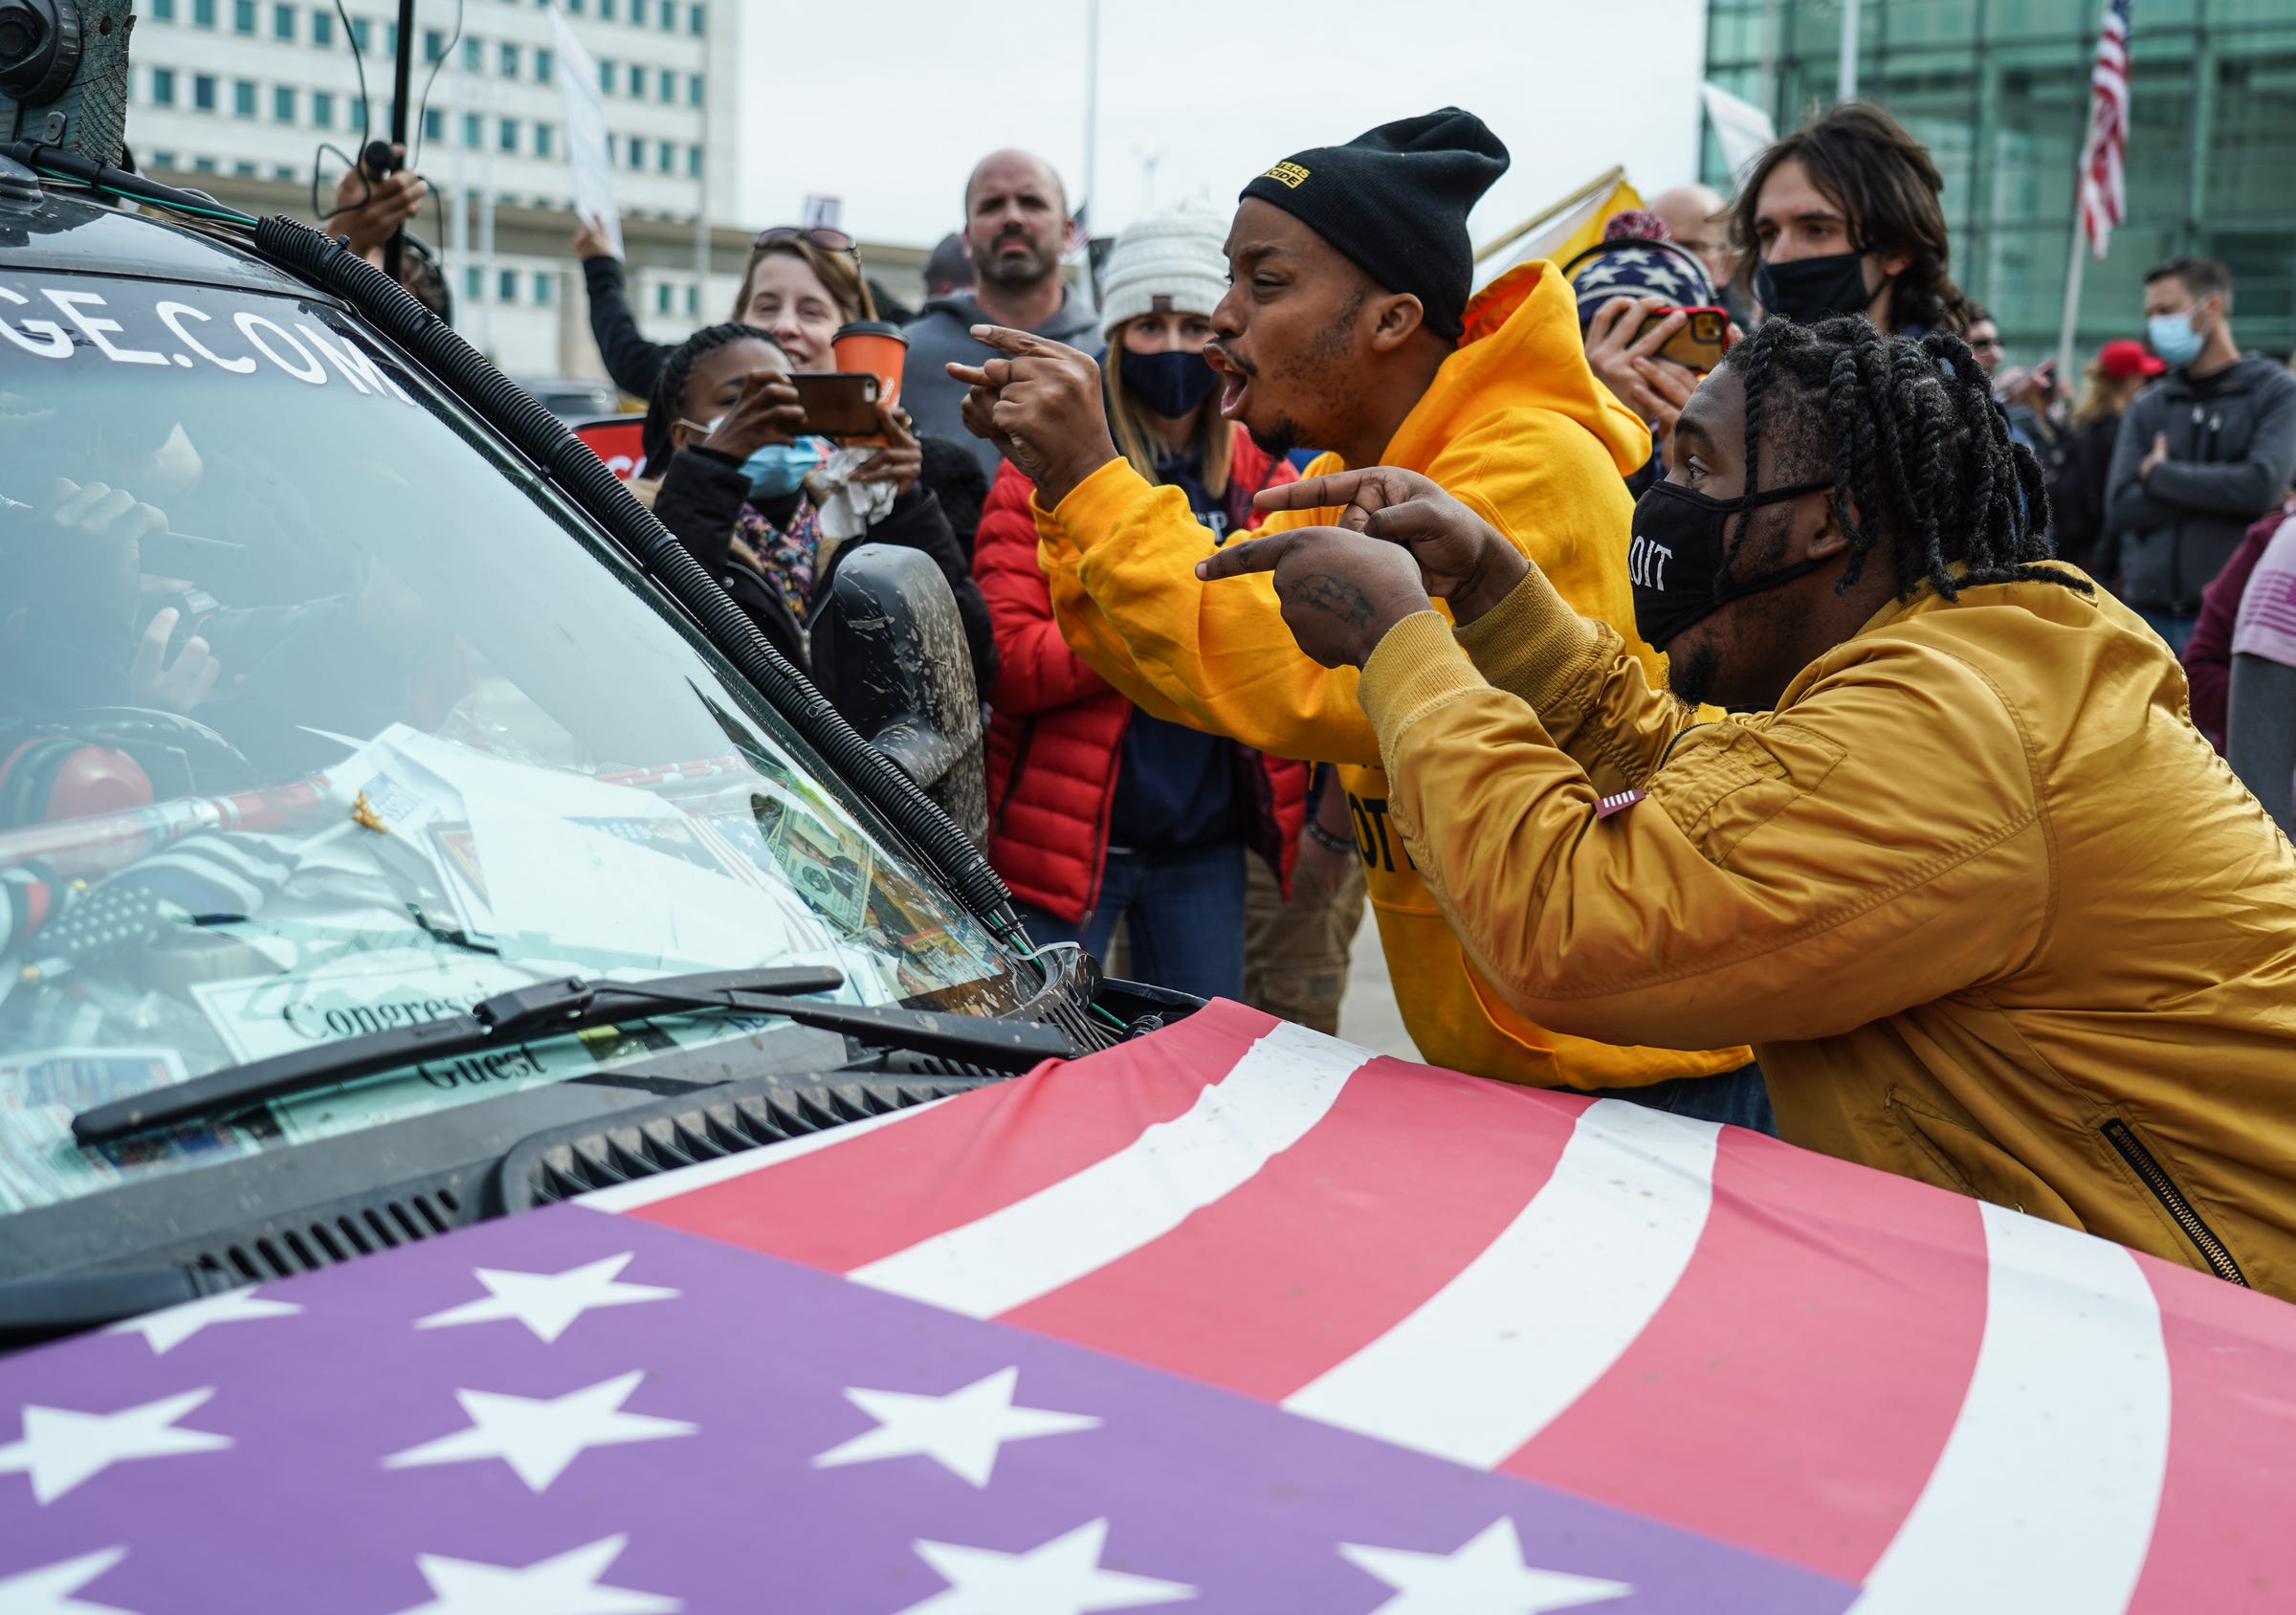 Trump supports rally outside of the TCF Center to rally in support of their candidate as Biden supporters counter-protest. Angelo Austin (right) of Detroit and Ralph Gaines of Detroit argue with the driver hauling the Trump Unity Bridge as he drives by Trump supporters gathered outside of the TCF Center in Detroit on Nov 5th.